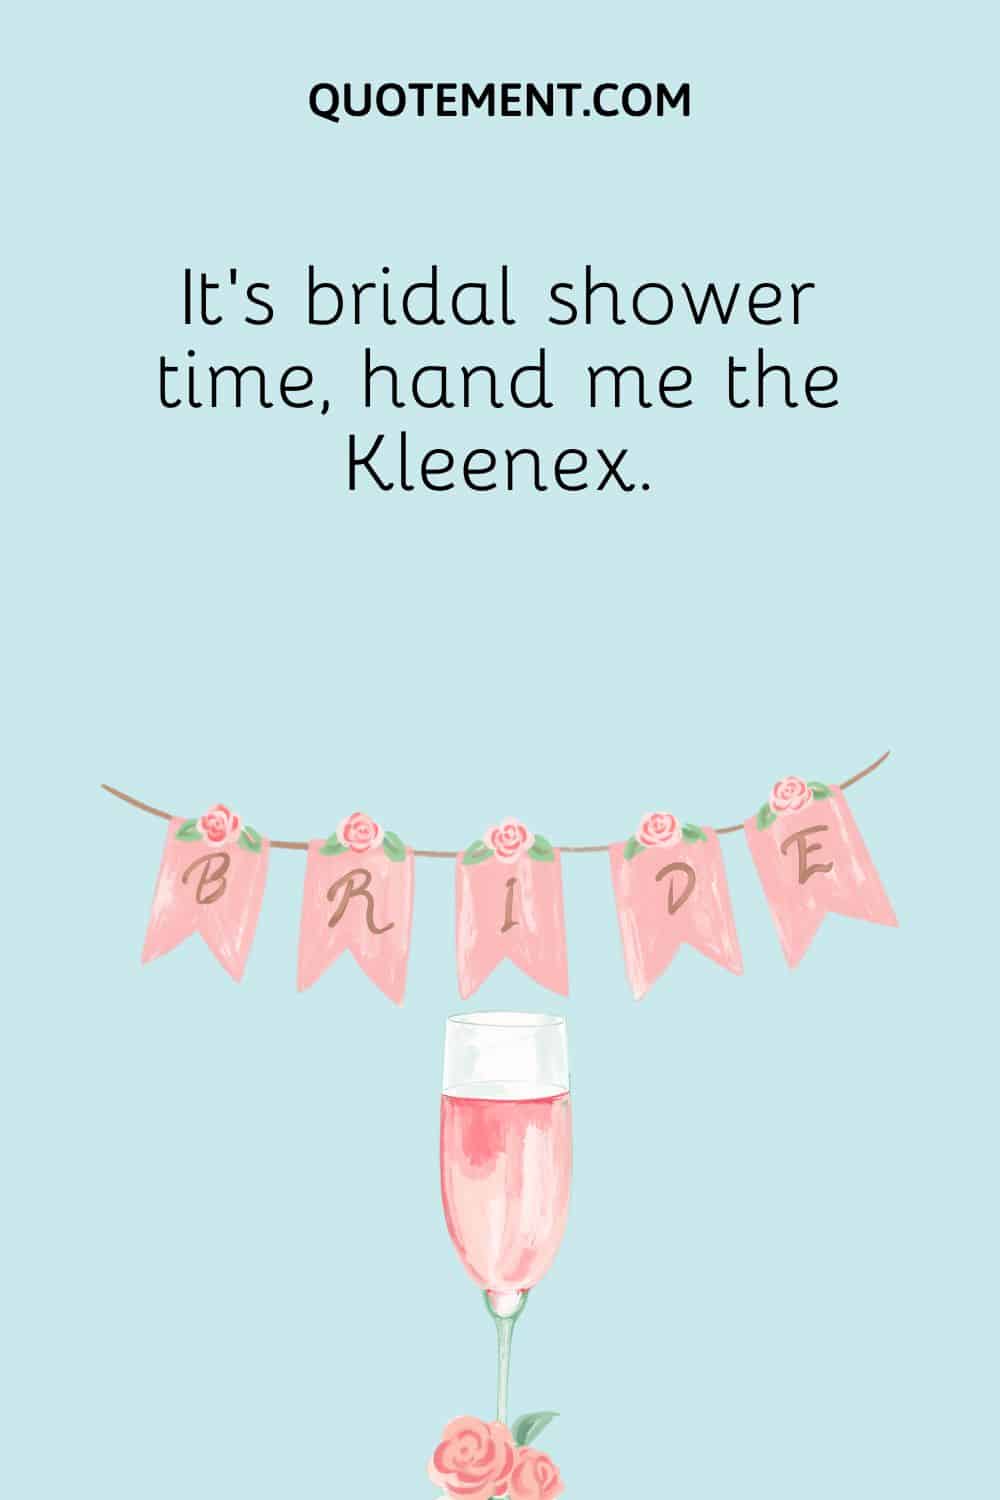 It’s bridal shower time, hand me the Kleenex.